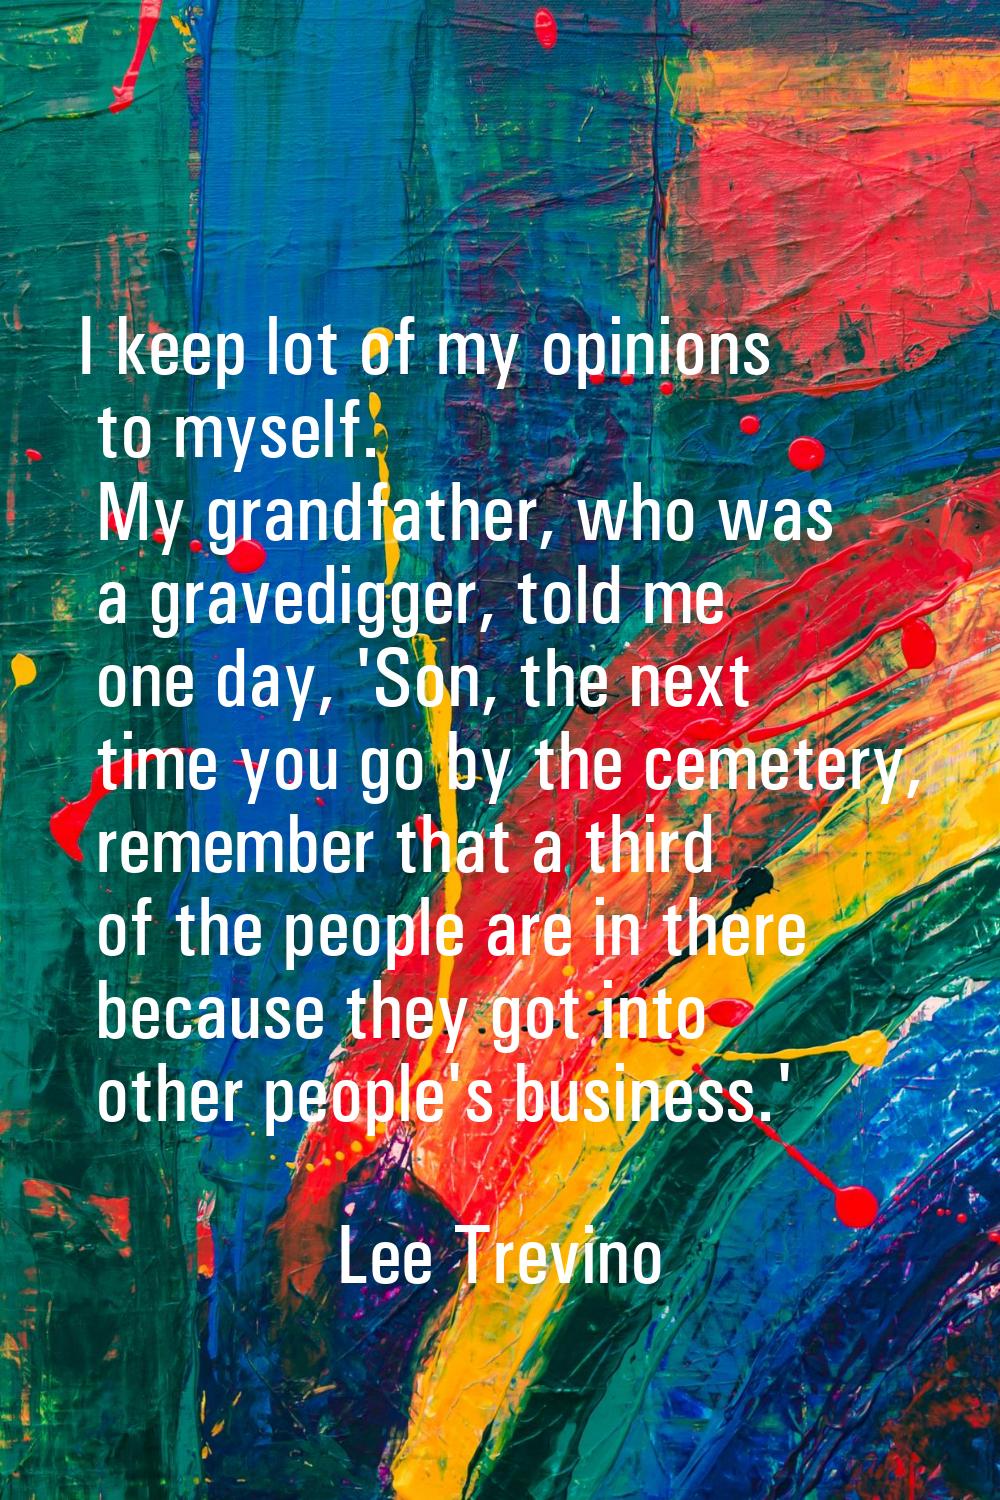 I keep lot of my opinions to myself. My grandfather, who was a gravedigger, told me one day, 'Son, 